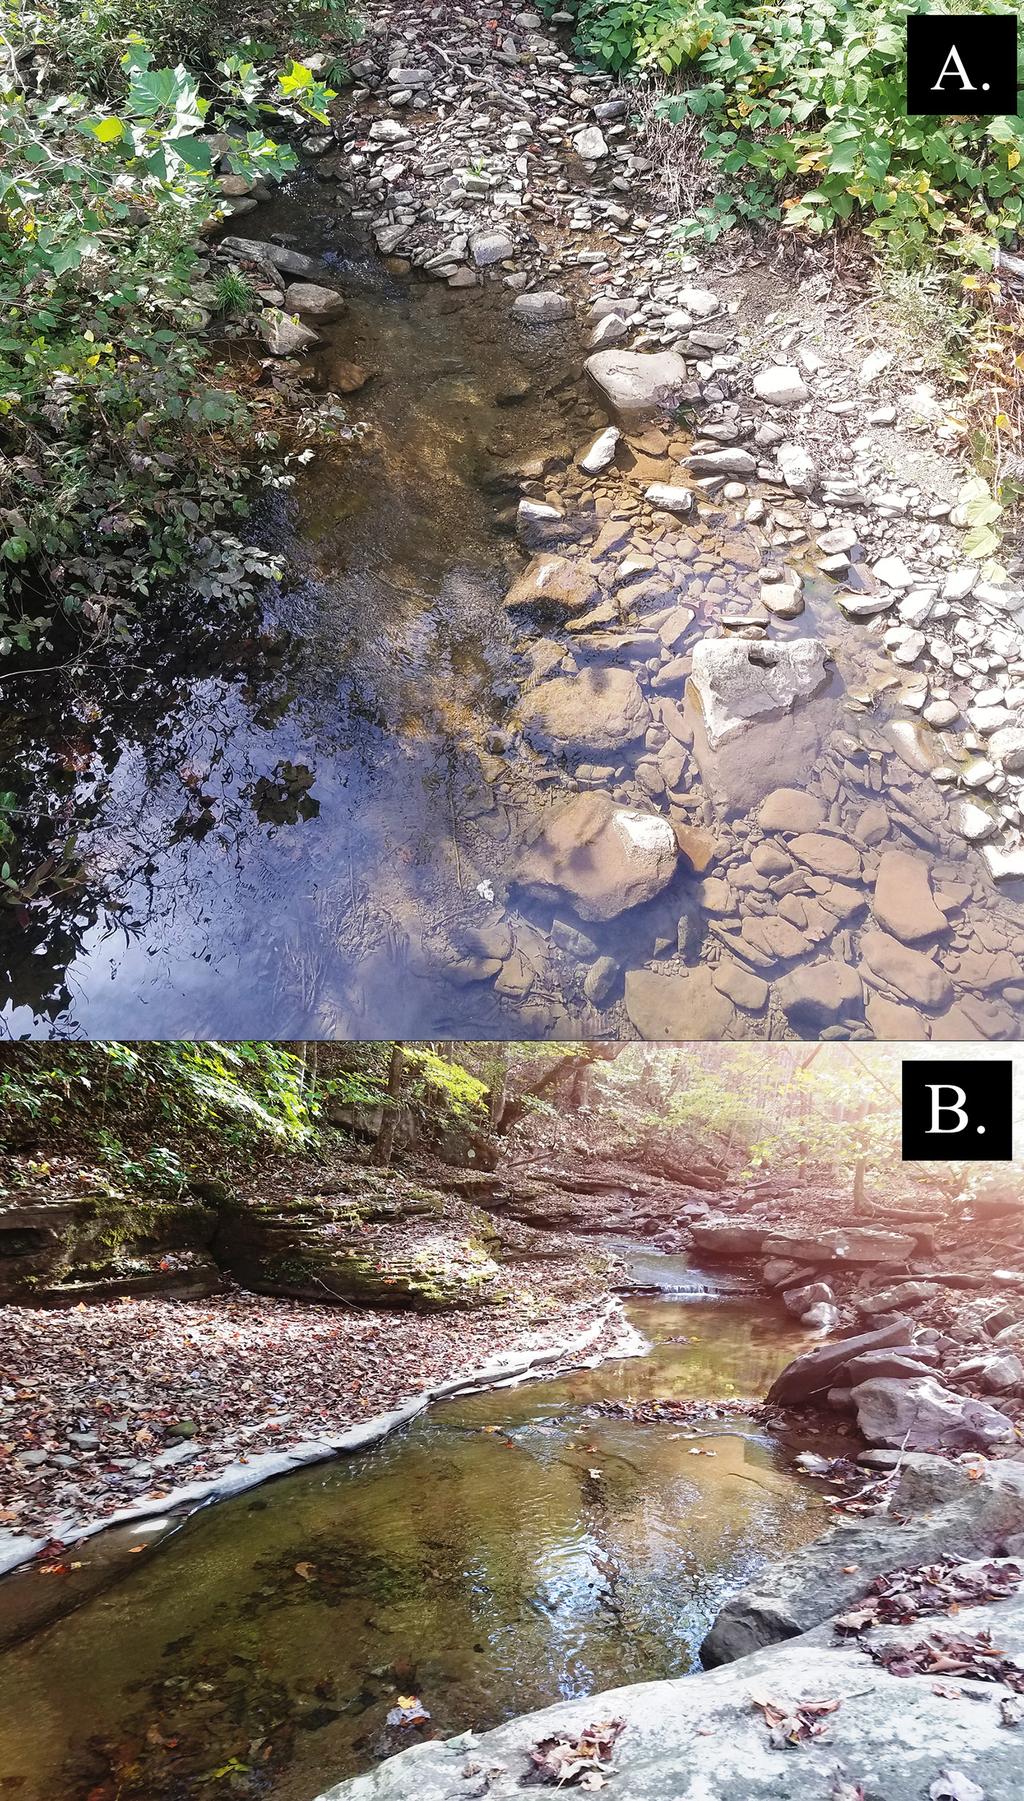 FIGURE 4. Cambarus appalachiensis type locality. Pipestem Creek at intersection of Tom-Honaker Road (CR 20-3) and State Route 20, 3.3 km (2.